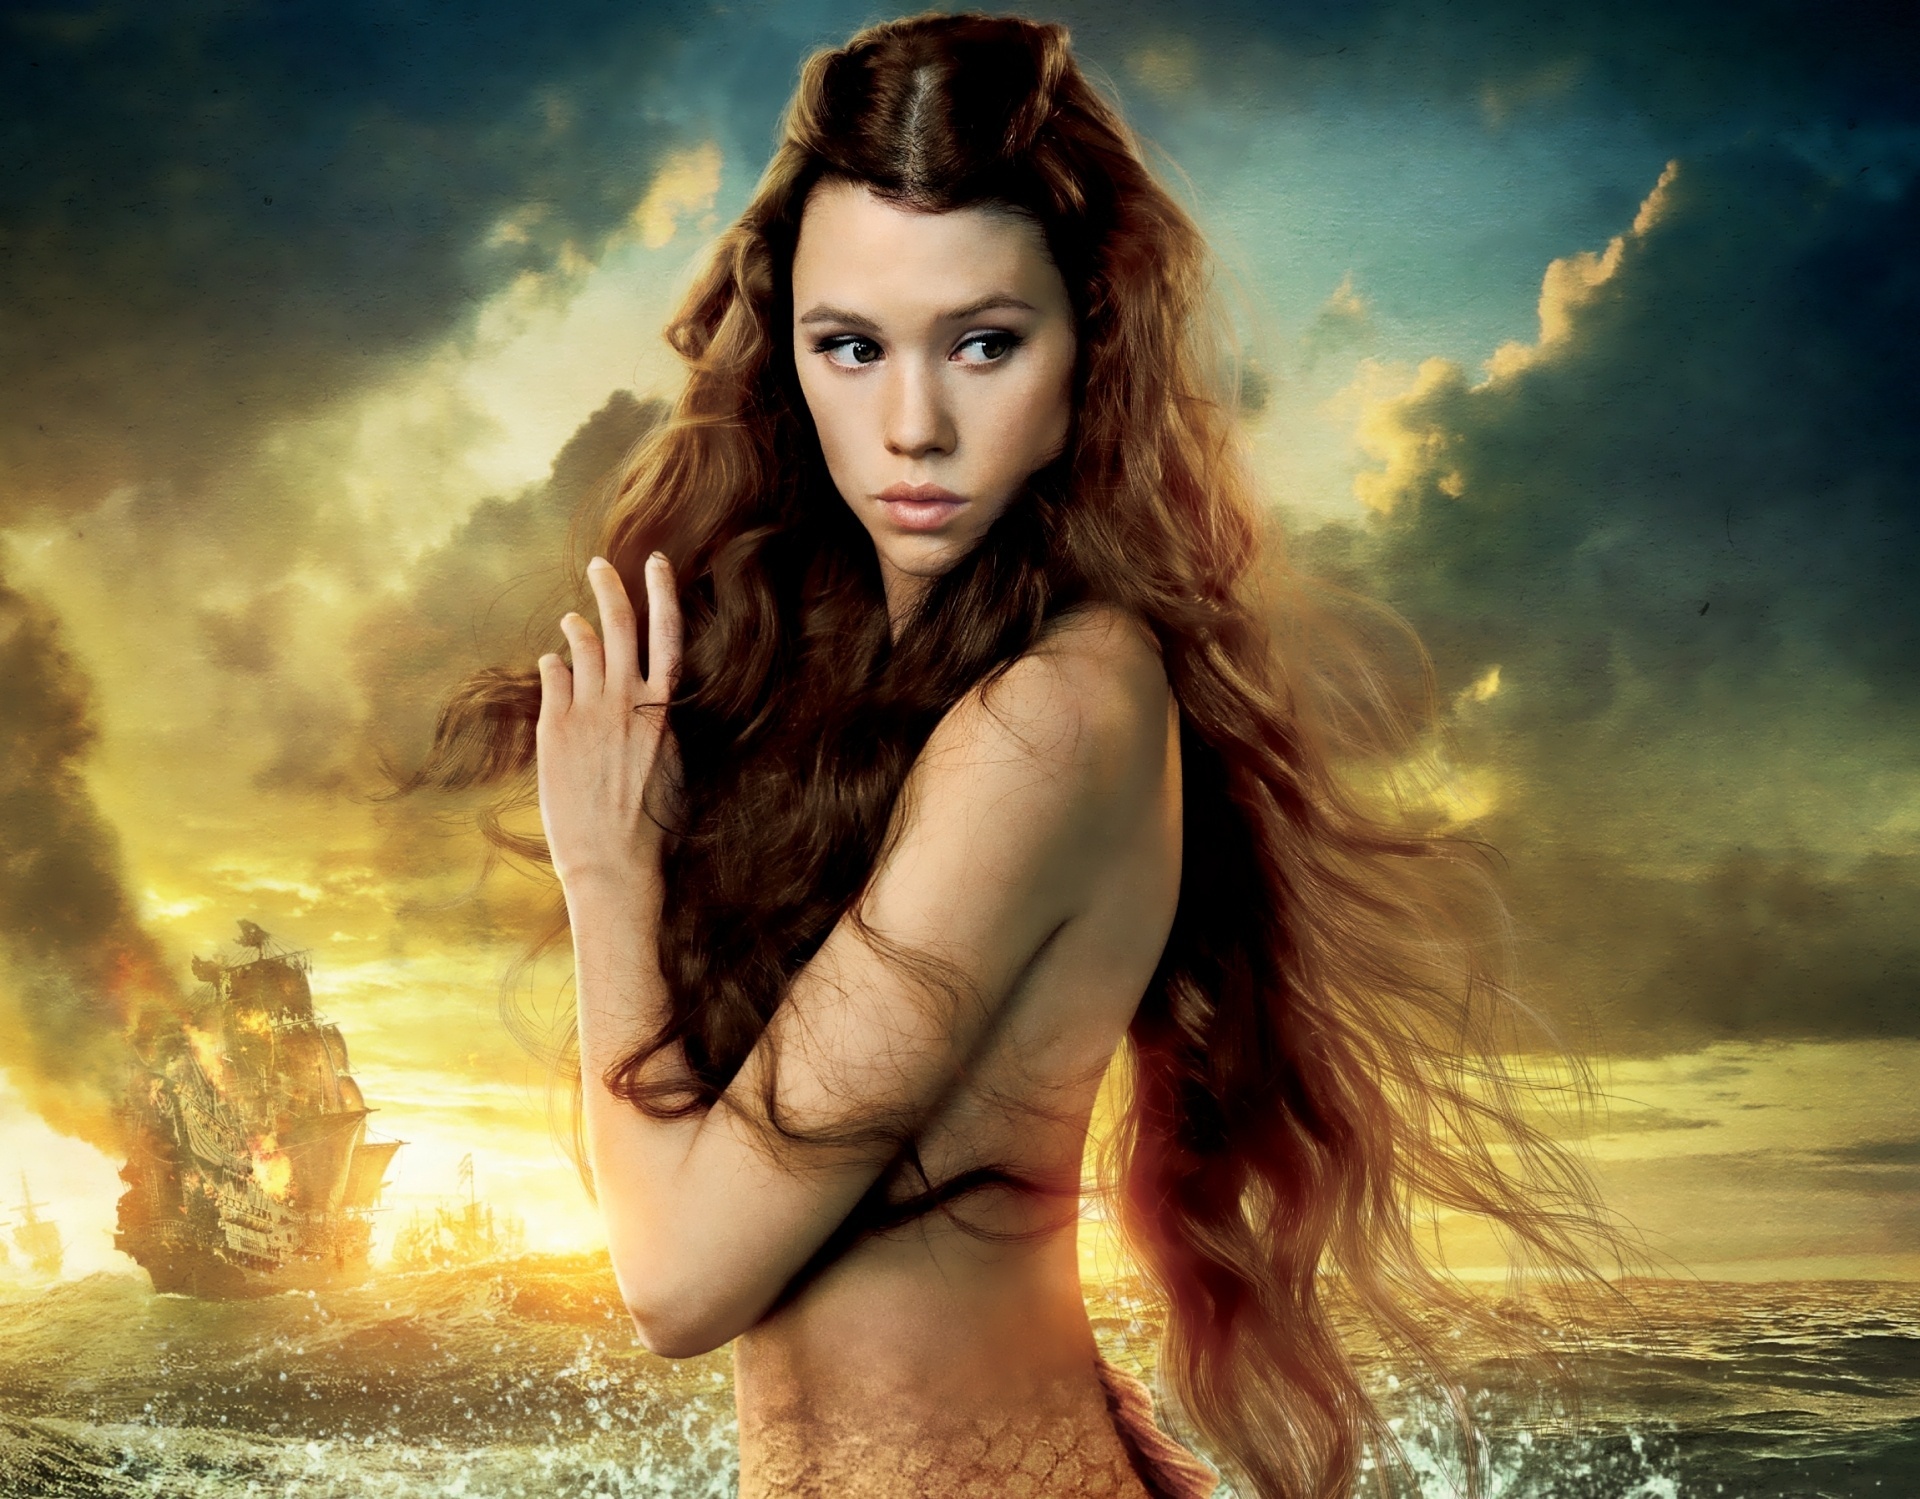 Wallpaper. Movies. photo. picture. mermaid, Pirates of the Caribbean, on stranger tides, Pirates of the caribbean, on stranger tides